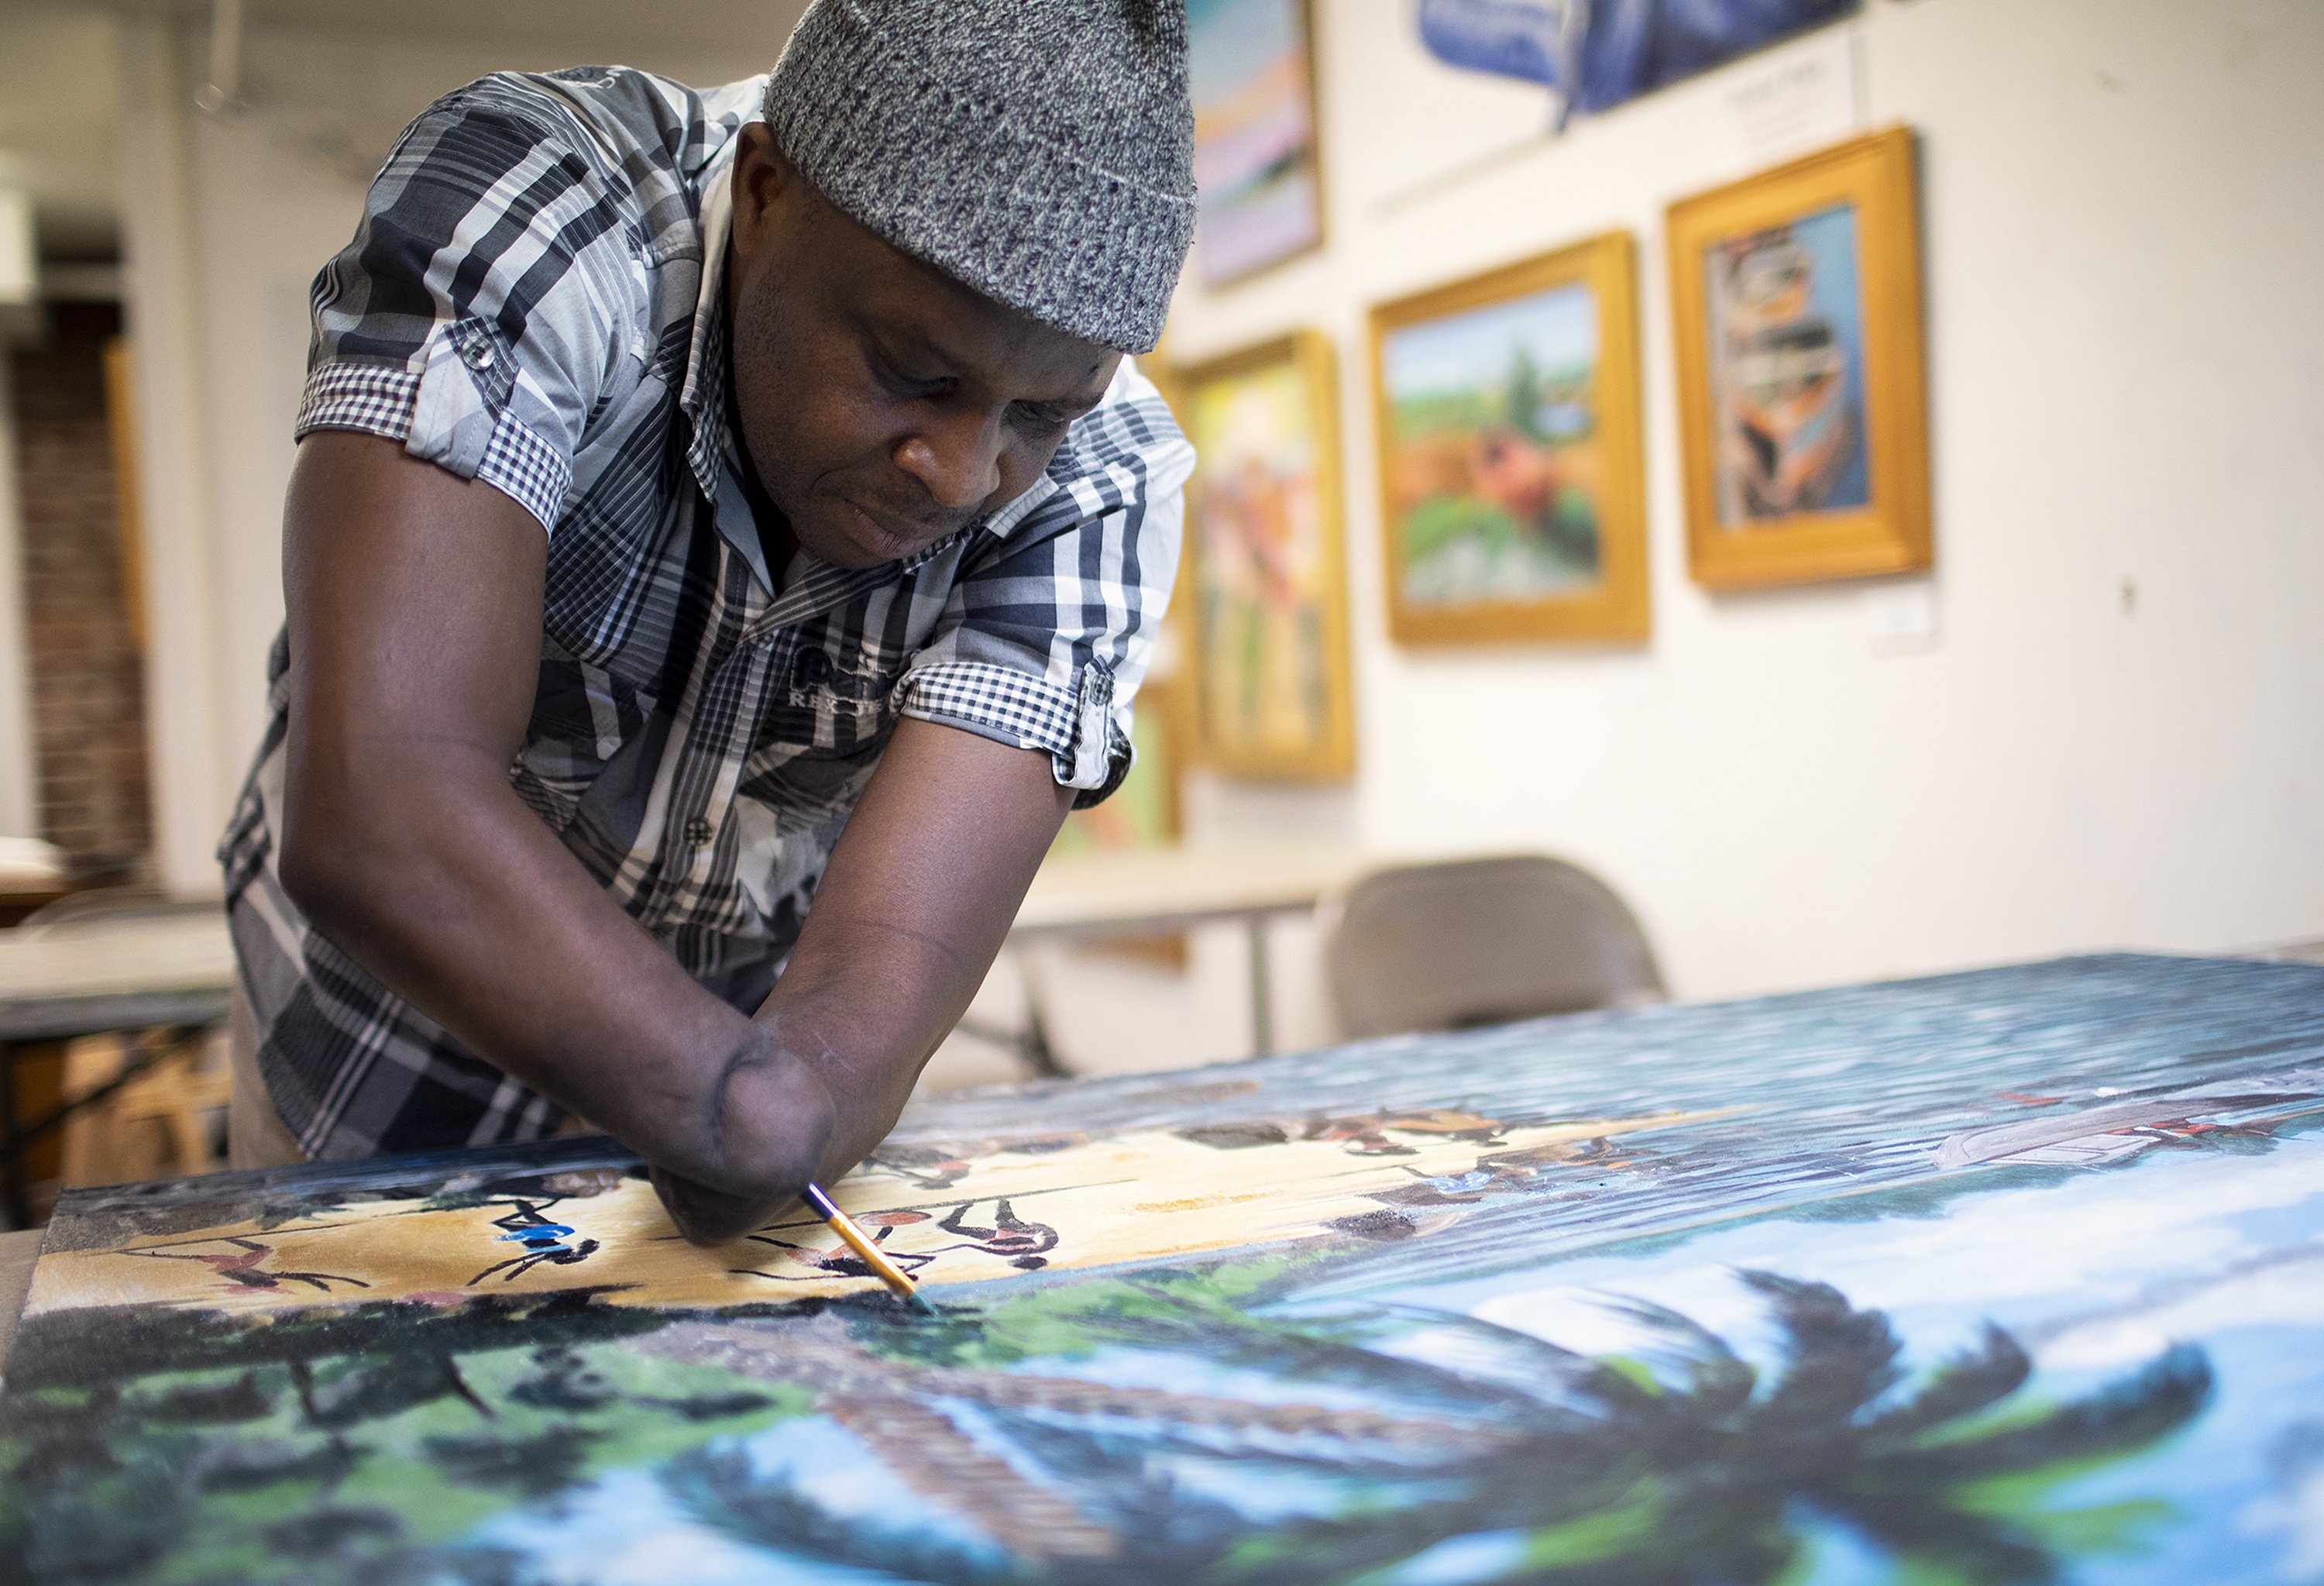 For Rwandan artist who lost his hands in an attack, painting leads to  healing and hope